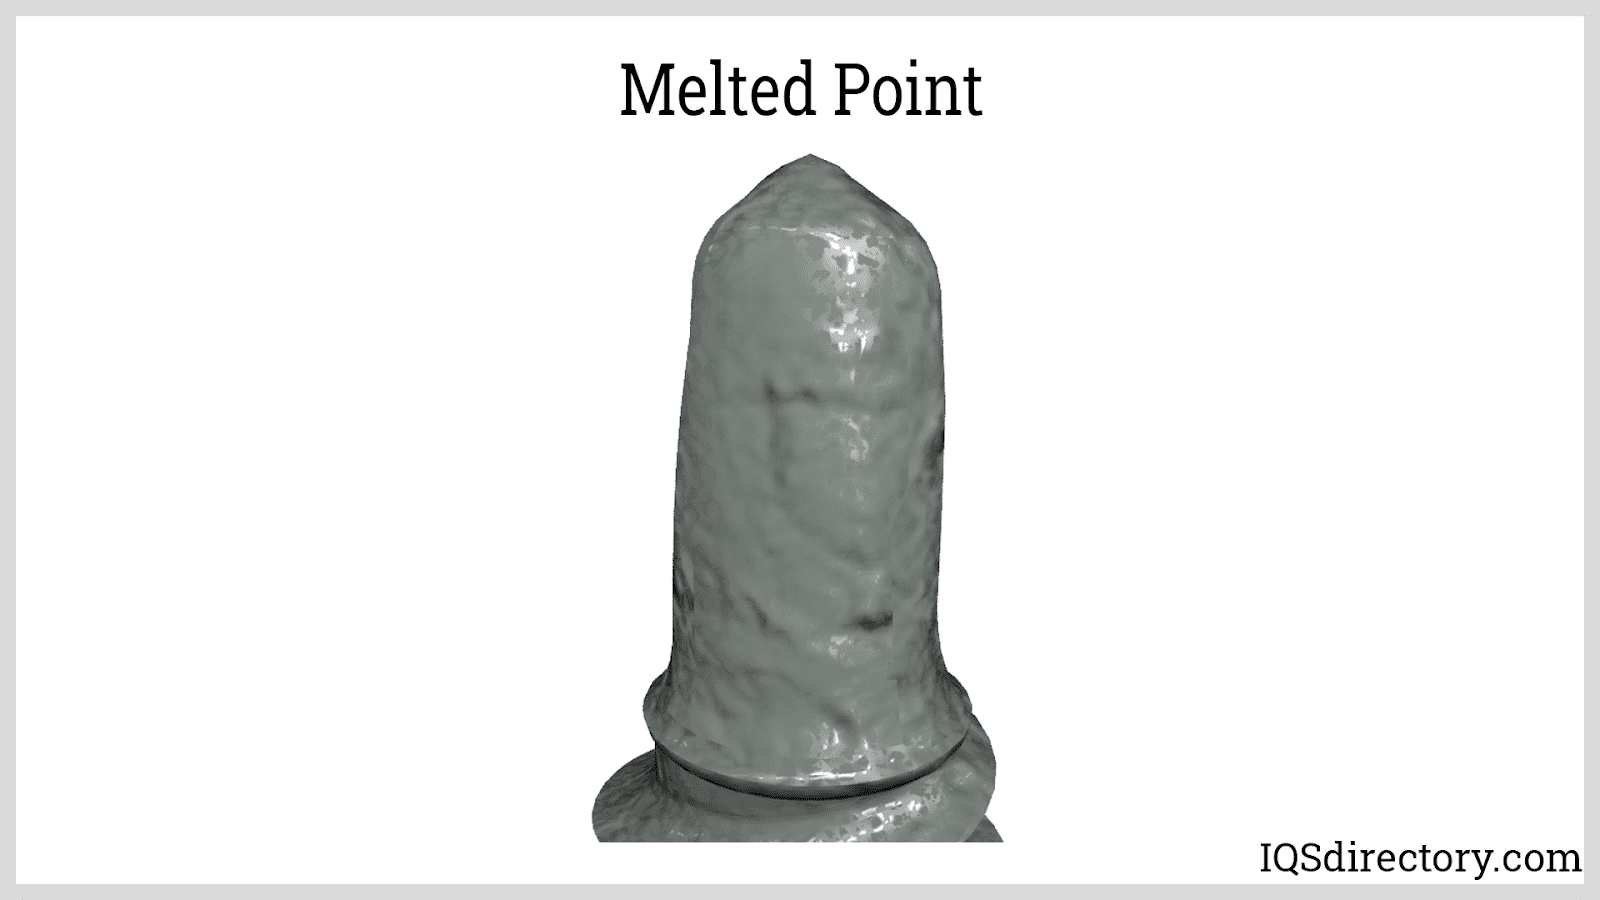 Melted Point